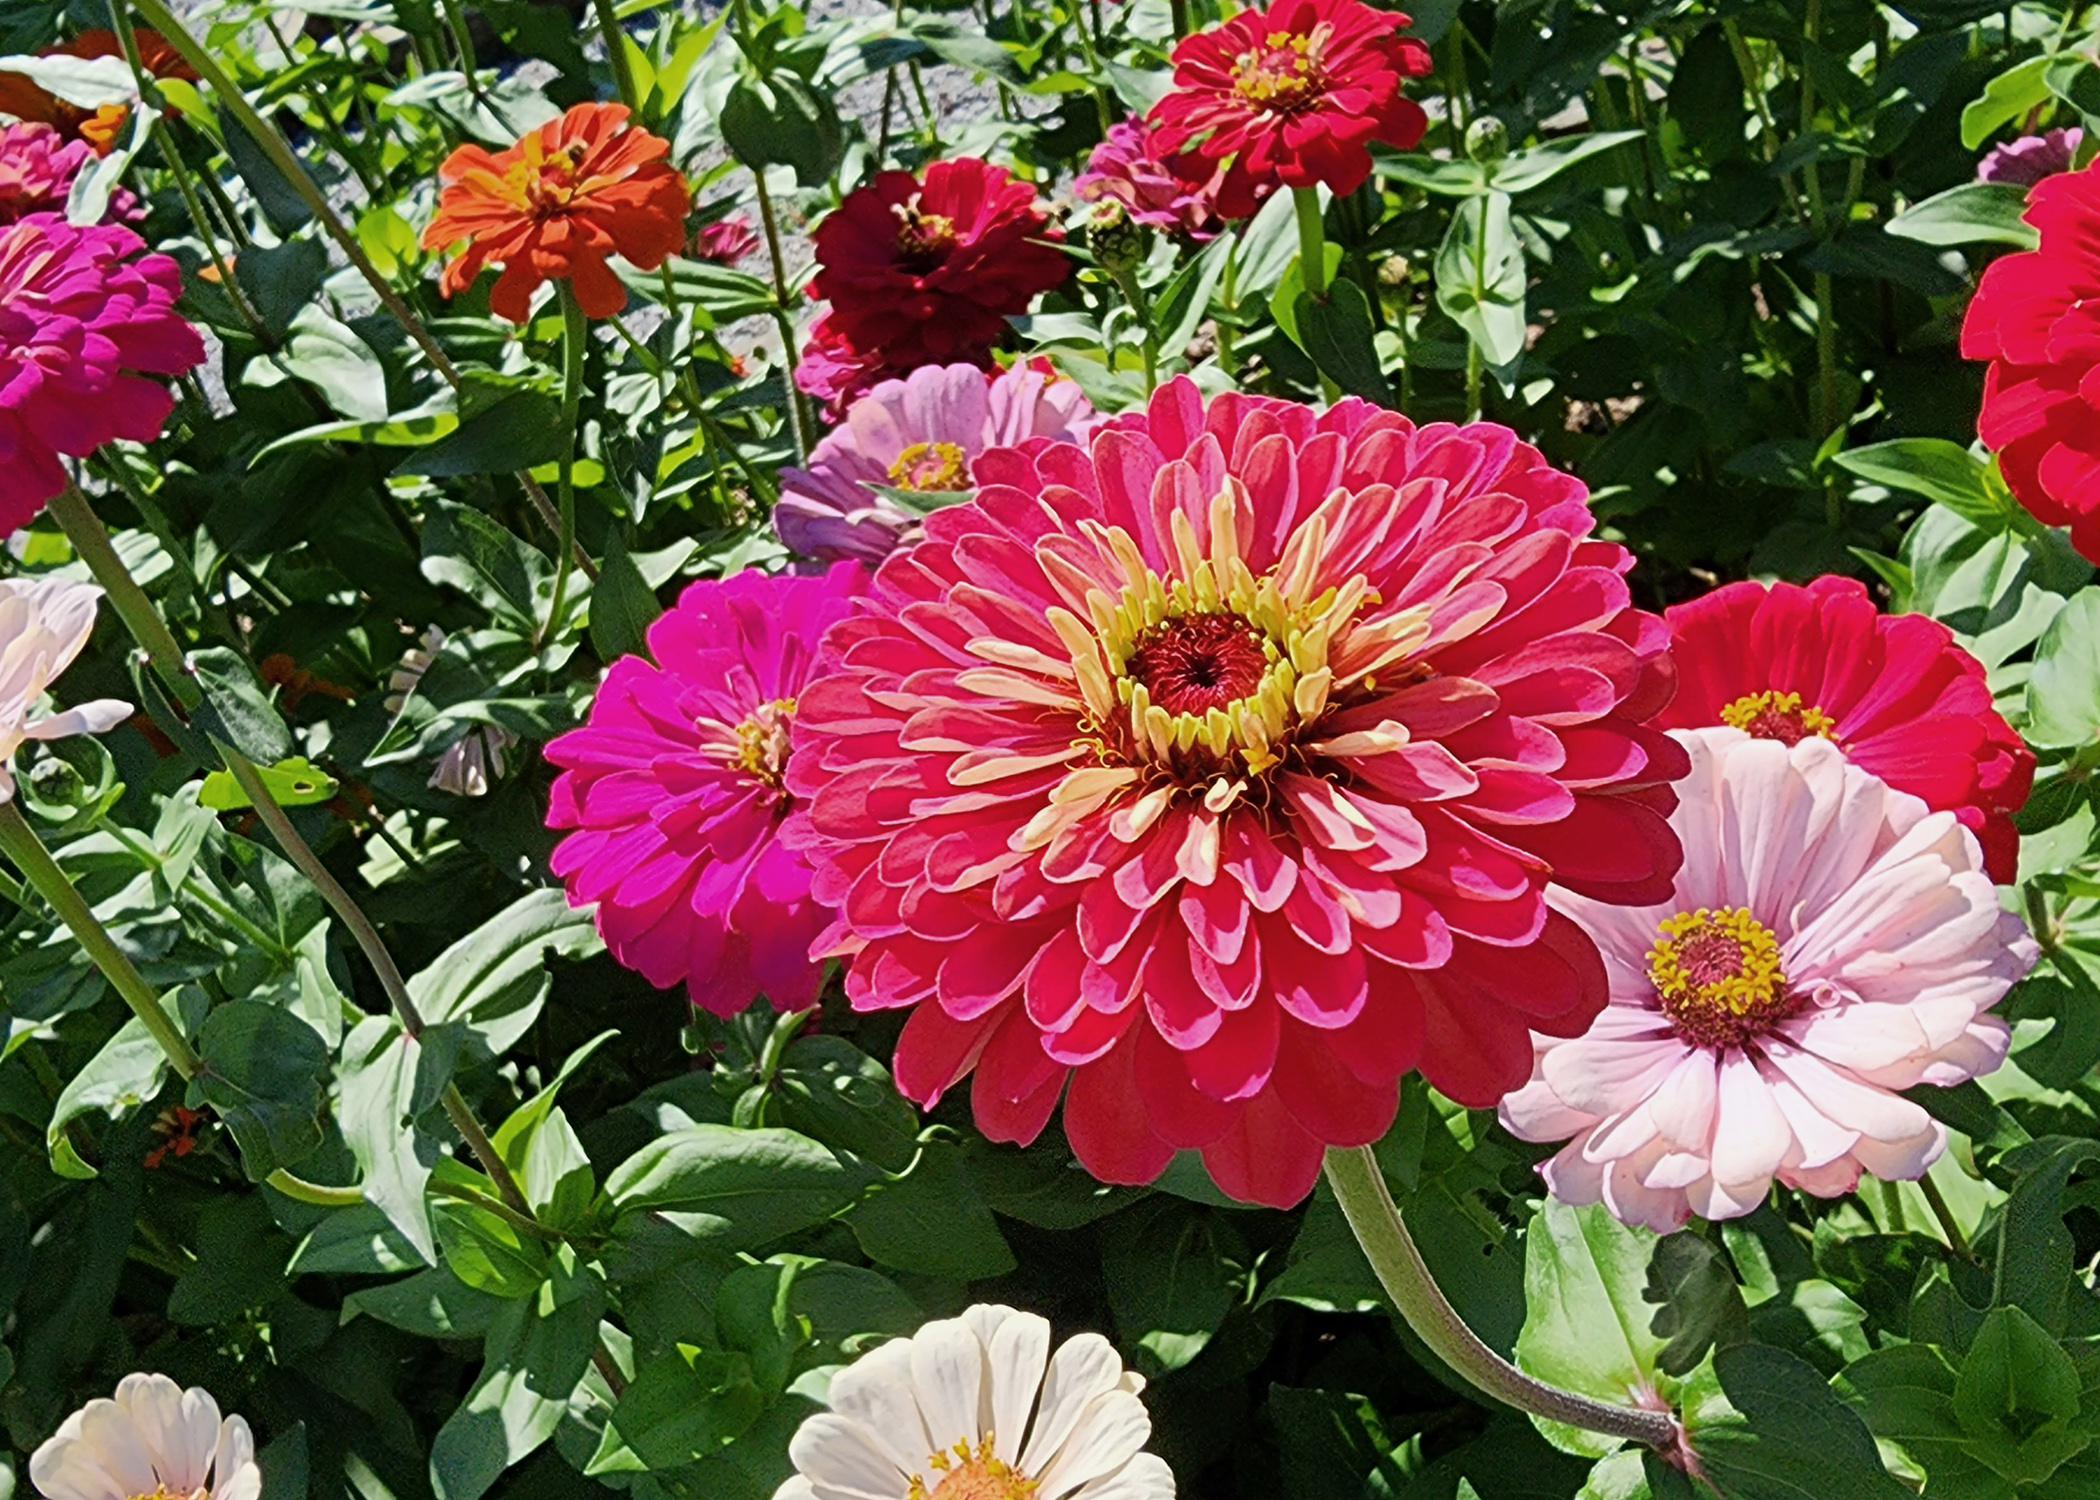 A large, red flower is surrounded by smaller, red and white flowers.